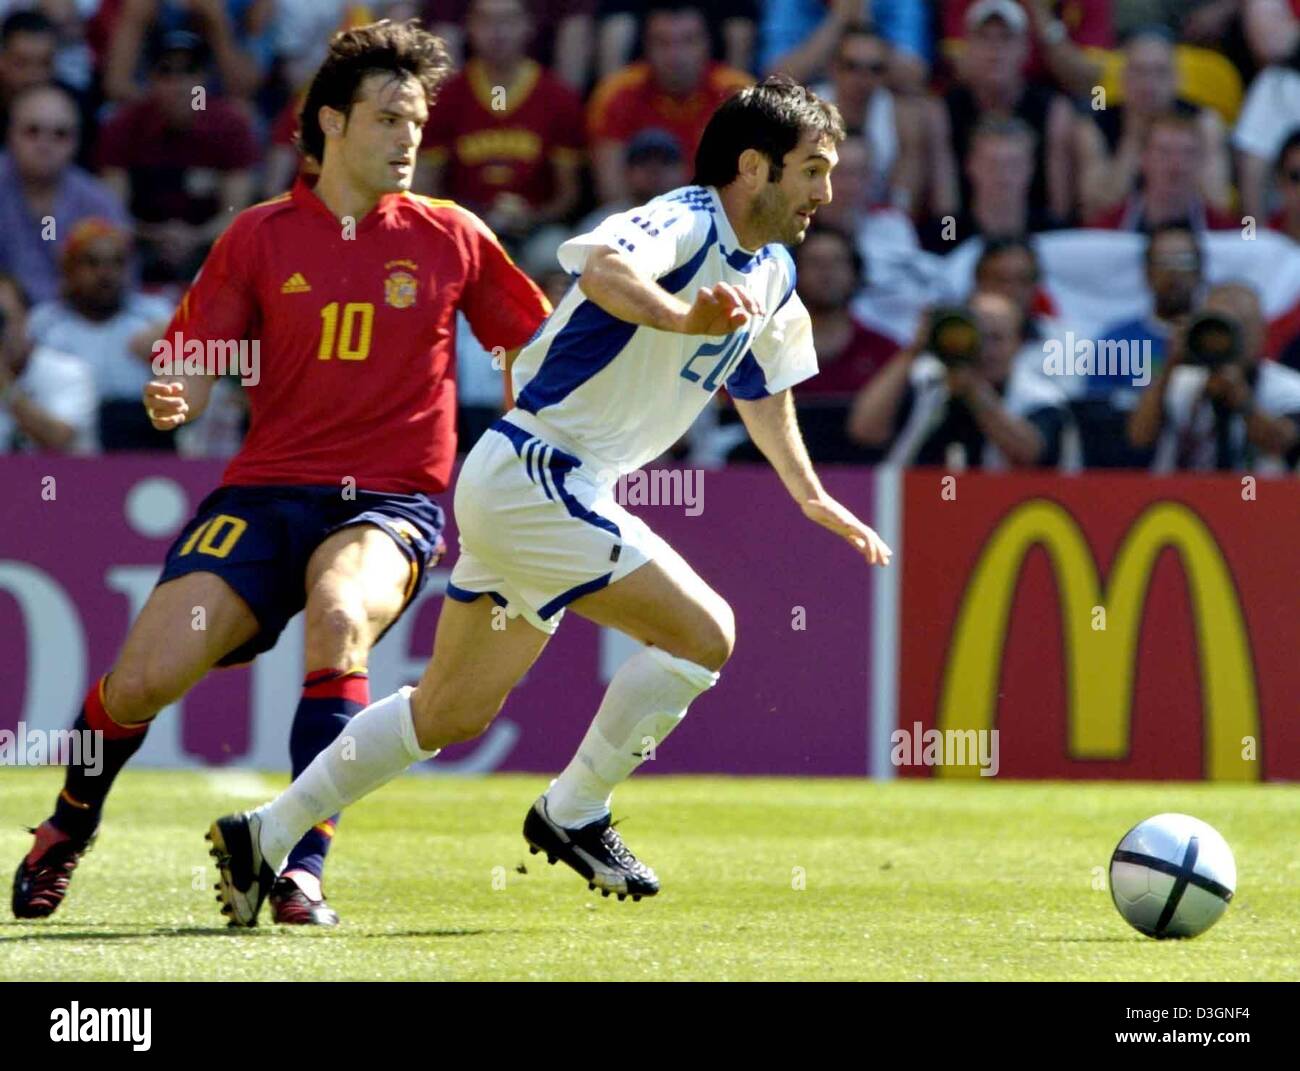 (dpa) - Greek midfielder Georgios Karagounis (R) wins a duel with Spanish forward Fernando Morientes during the Soccer Euro 2004 group game opposing Spain and Greece at the Bessa Stadium in Porto, Portugal, 16 June 2004. The game ended in a 1-1 draw. +++ NO MOBILEPHONE APPLICATIONS +++ Stock Photo